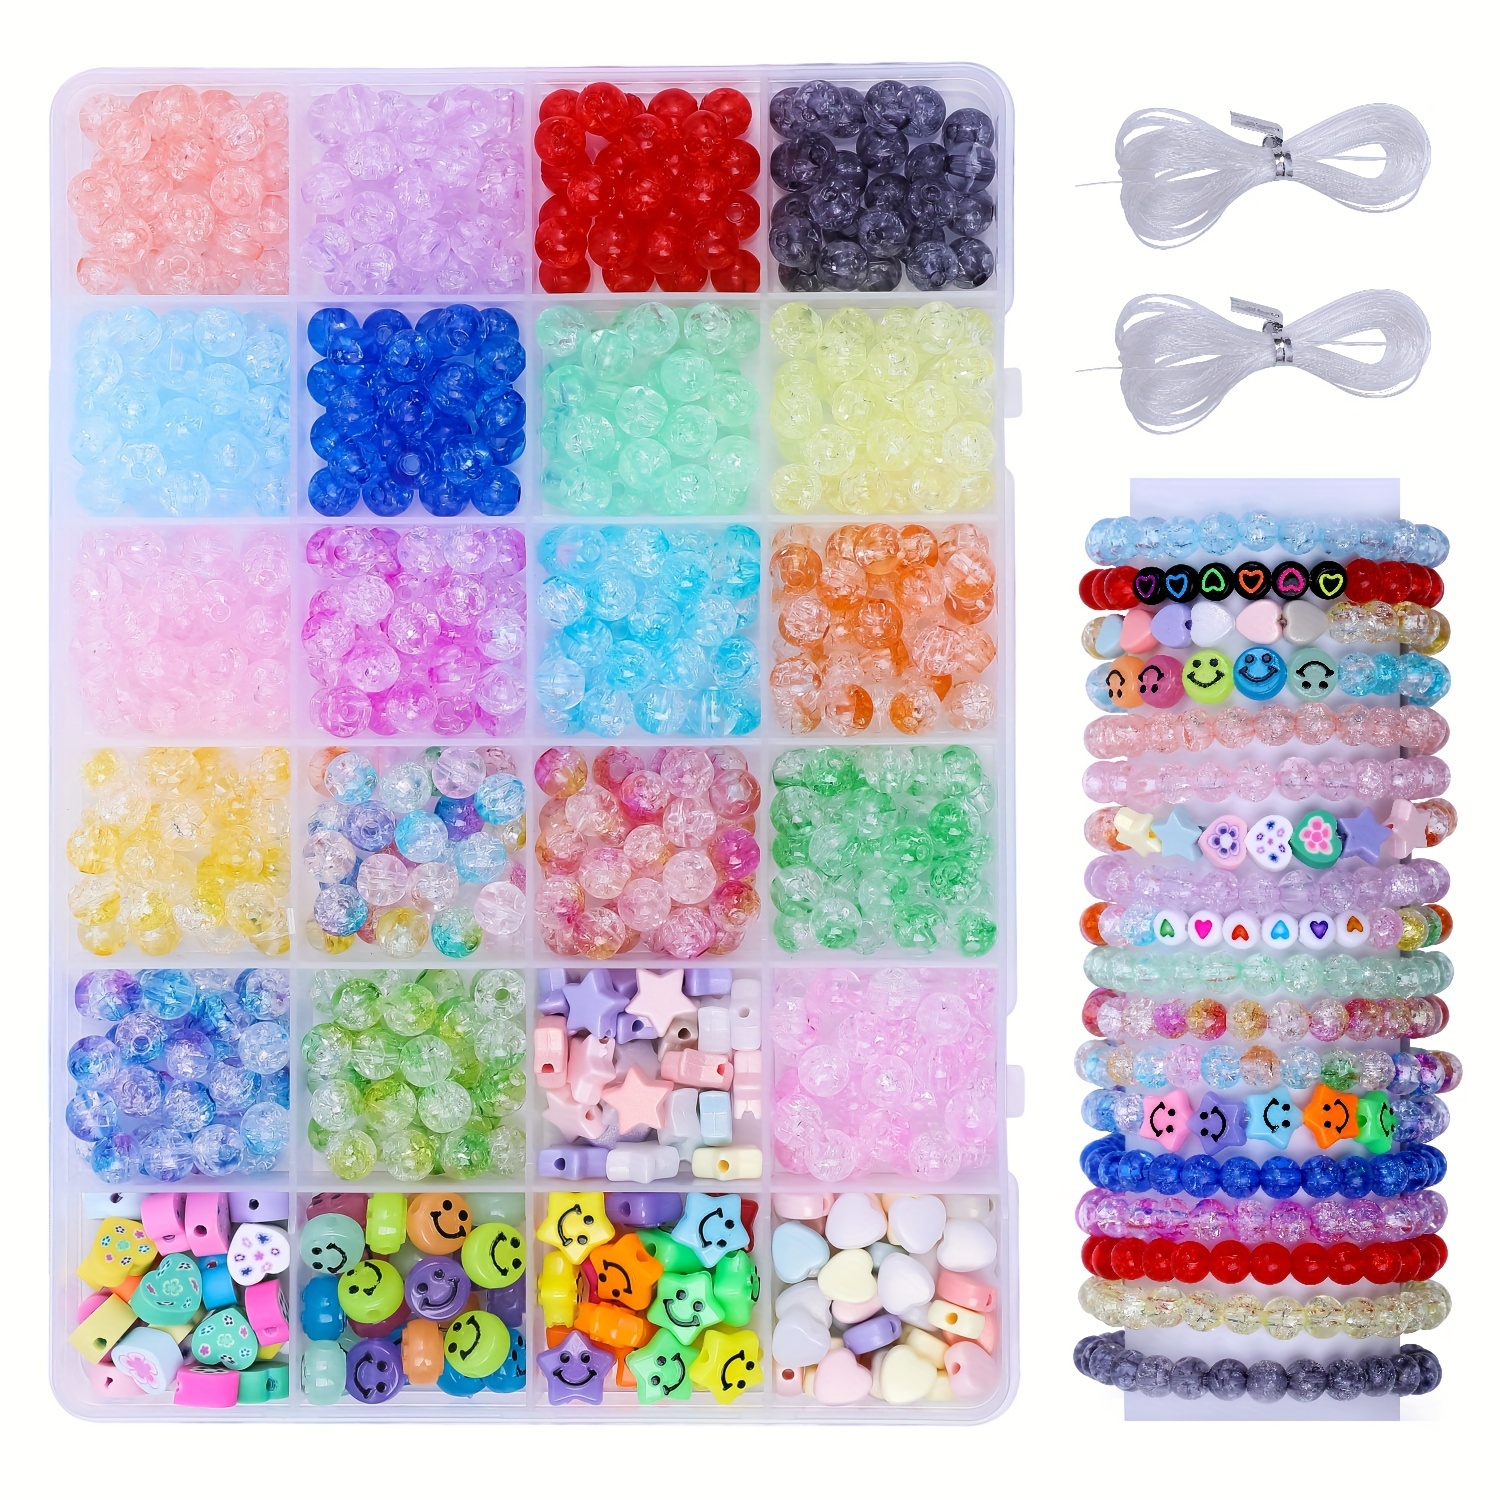  220 PCS Star Beads, 10mm Friendship Bracelet Beads Clear  Acrylic Star Shape Spacer Beads Colored Star Beads for DIY Jewelry Bracelet  Earring Necklace Craft Making with 5M Elastic String